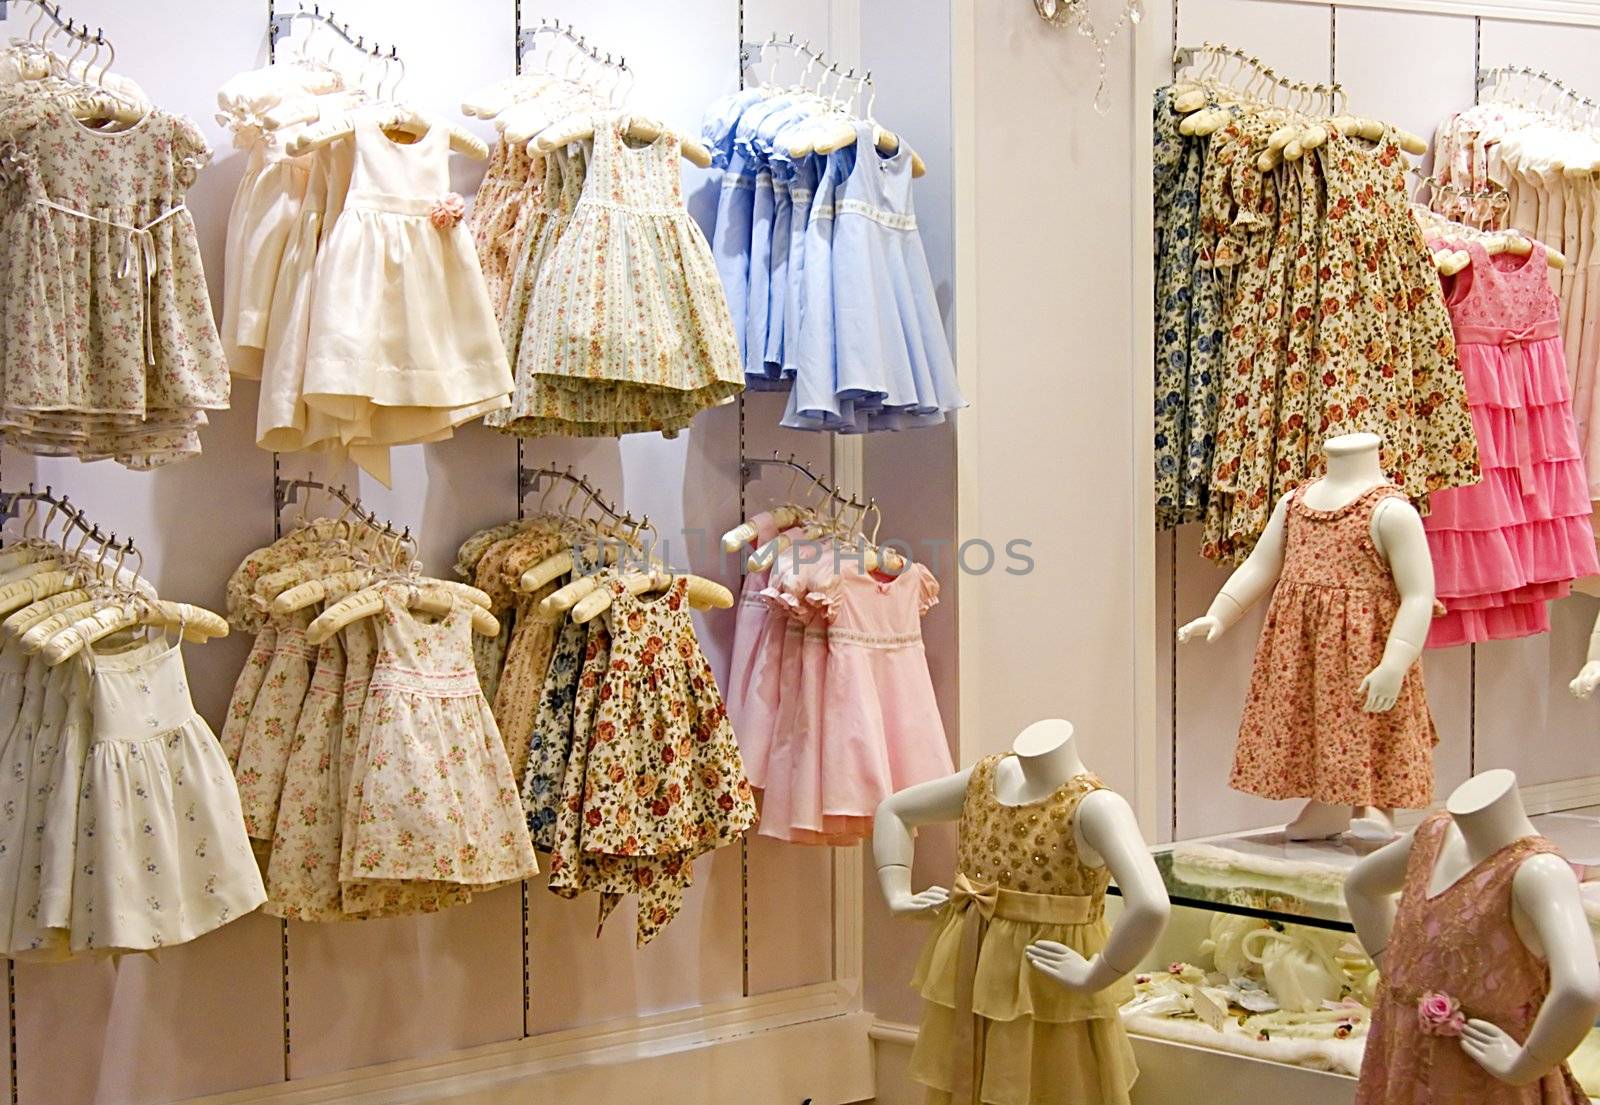 Image of children's clothes in a shop.
